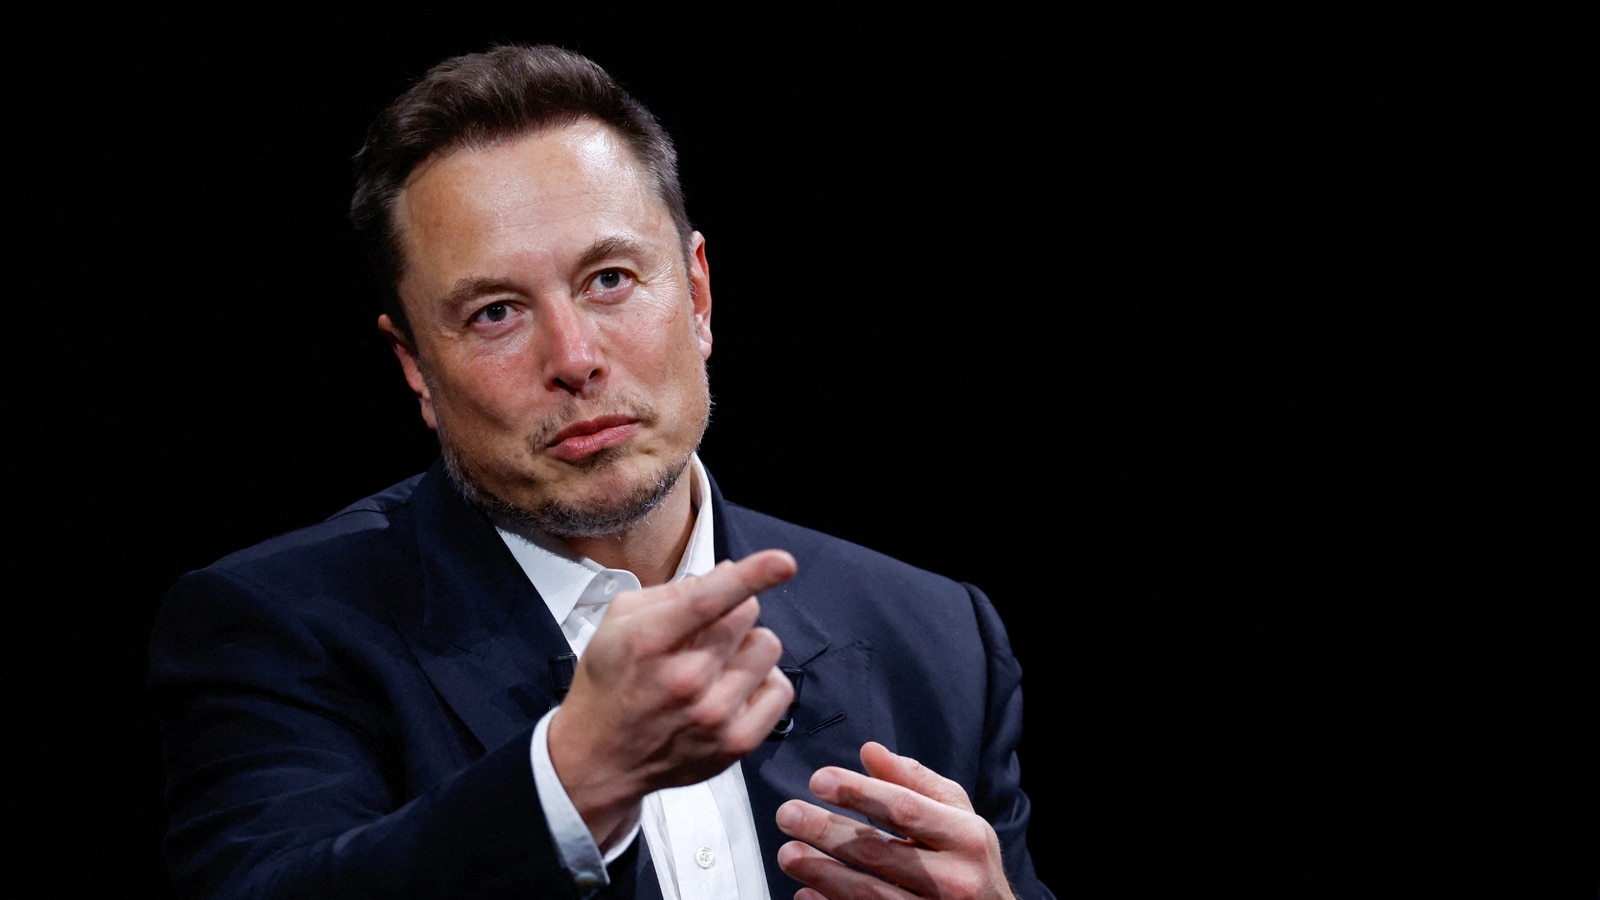 New Republic slaps 'Scoundrel of the Year’ title on X owner Elon Musk, calls him ‘evil’, 'deeply hateful'